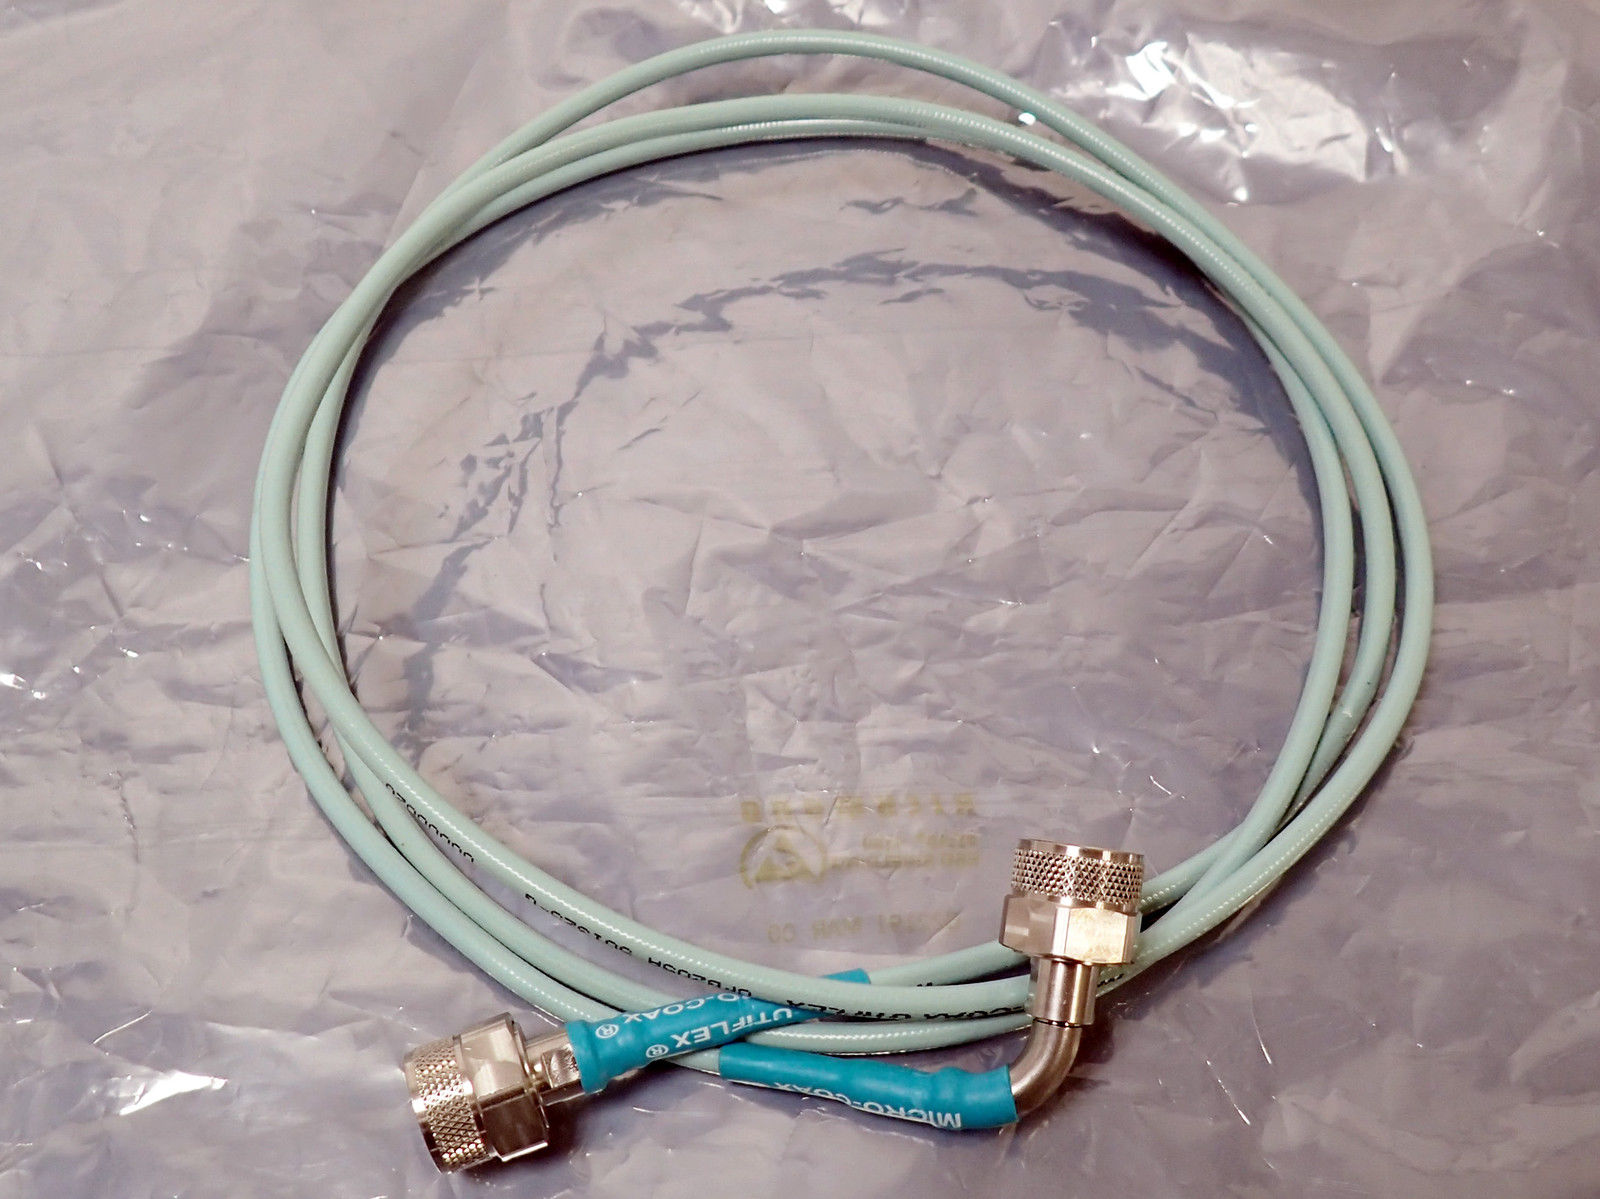 micro-coax-ufb205a-utiflex-ultra-low-loss-coaxial-cable-n-m-50ohm-26-5ghz-6-nos-used-equipment-0.jpg